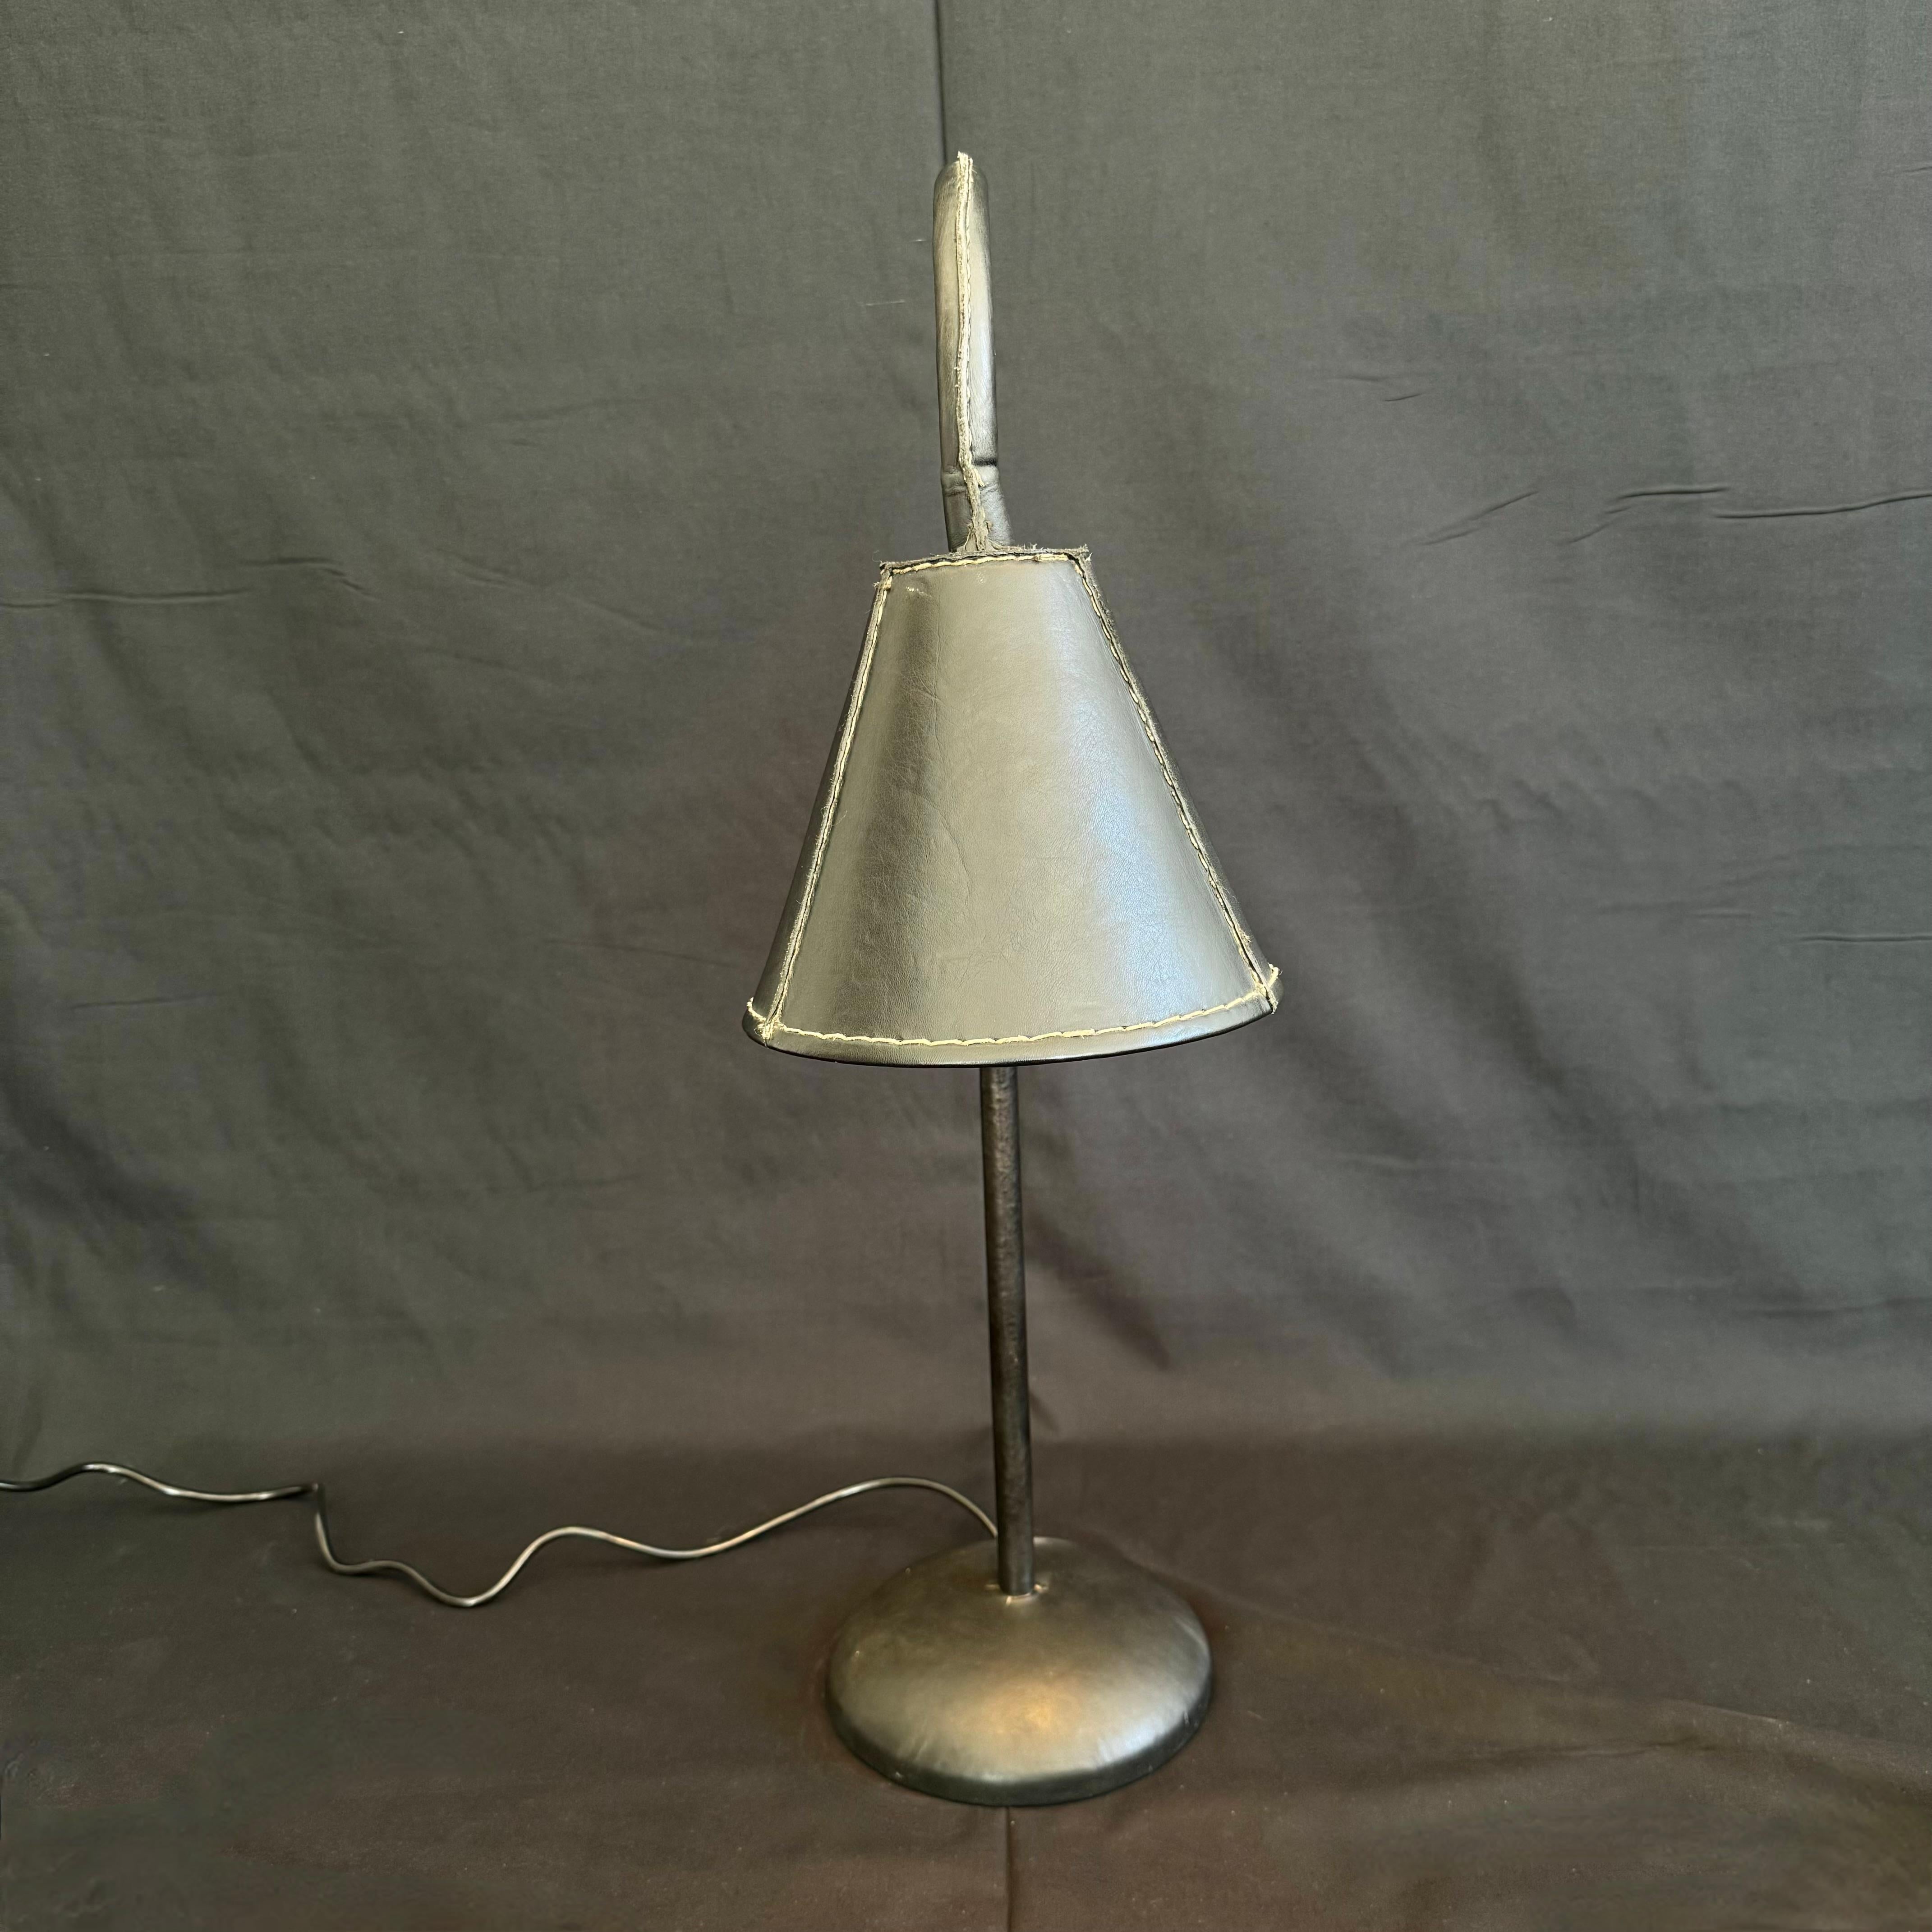 Spanish Black Leather Table Lamp in the Style of Jacques Adnet, 1970s Spain For Sale